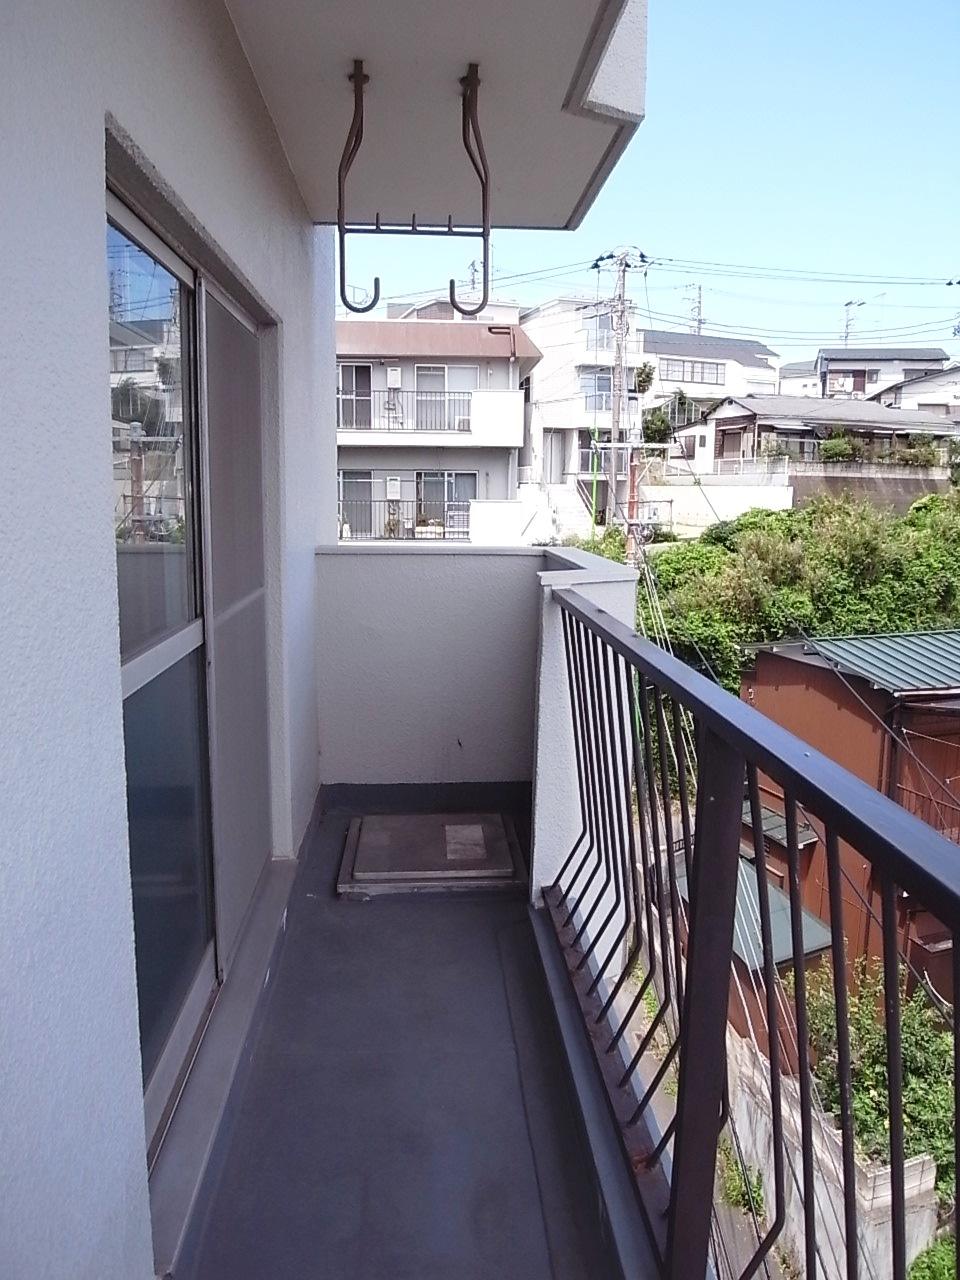 Balcony. Southeast side of Japanese-style room before Local (June 2013) Shooting